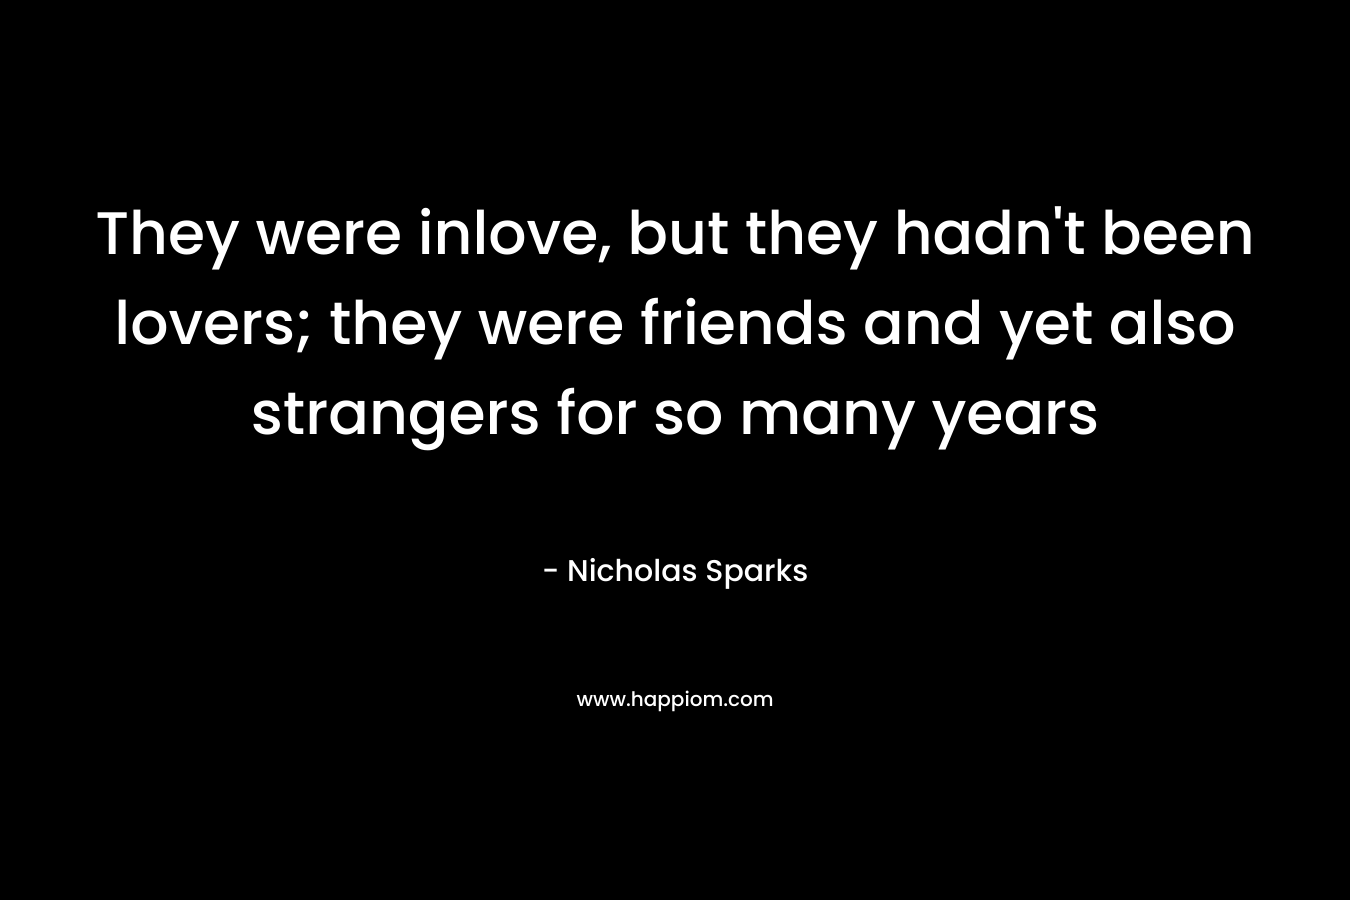 They were inlove, but they hadn't been lovers; they were friends and yet also strangers for so many years